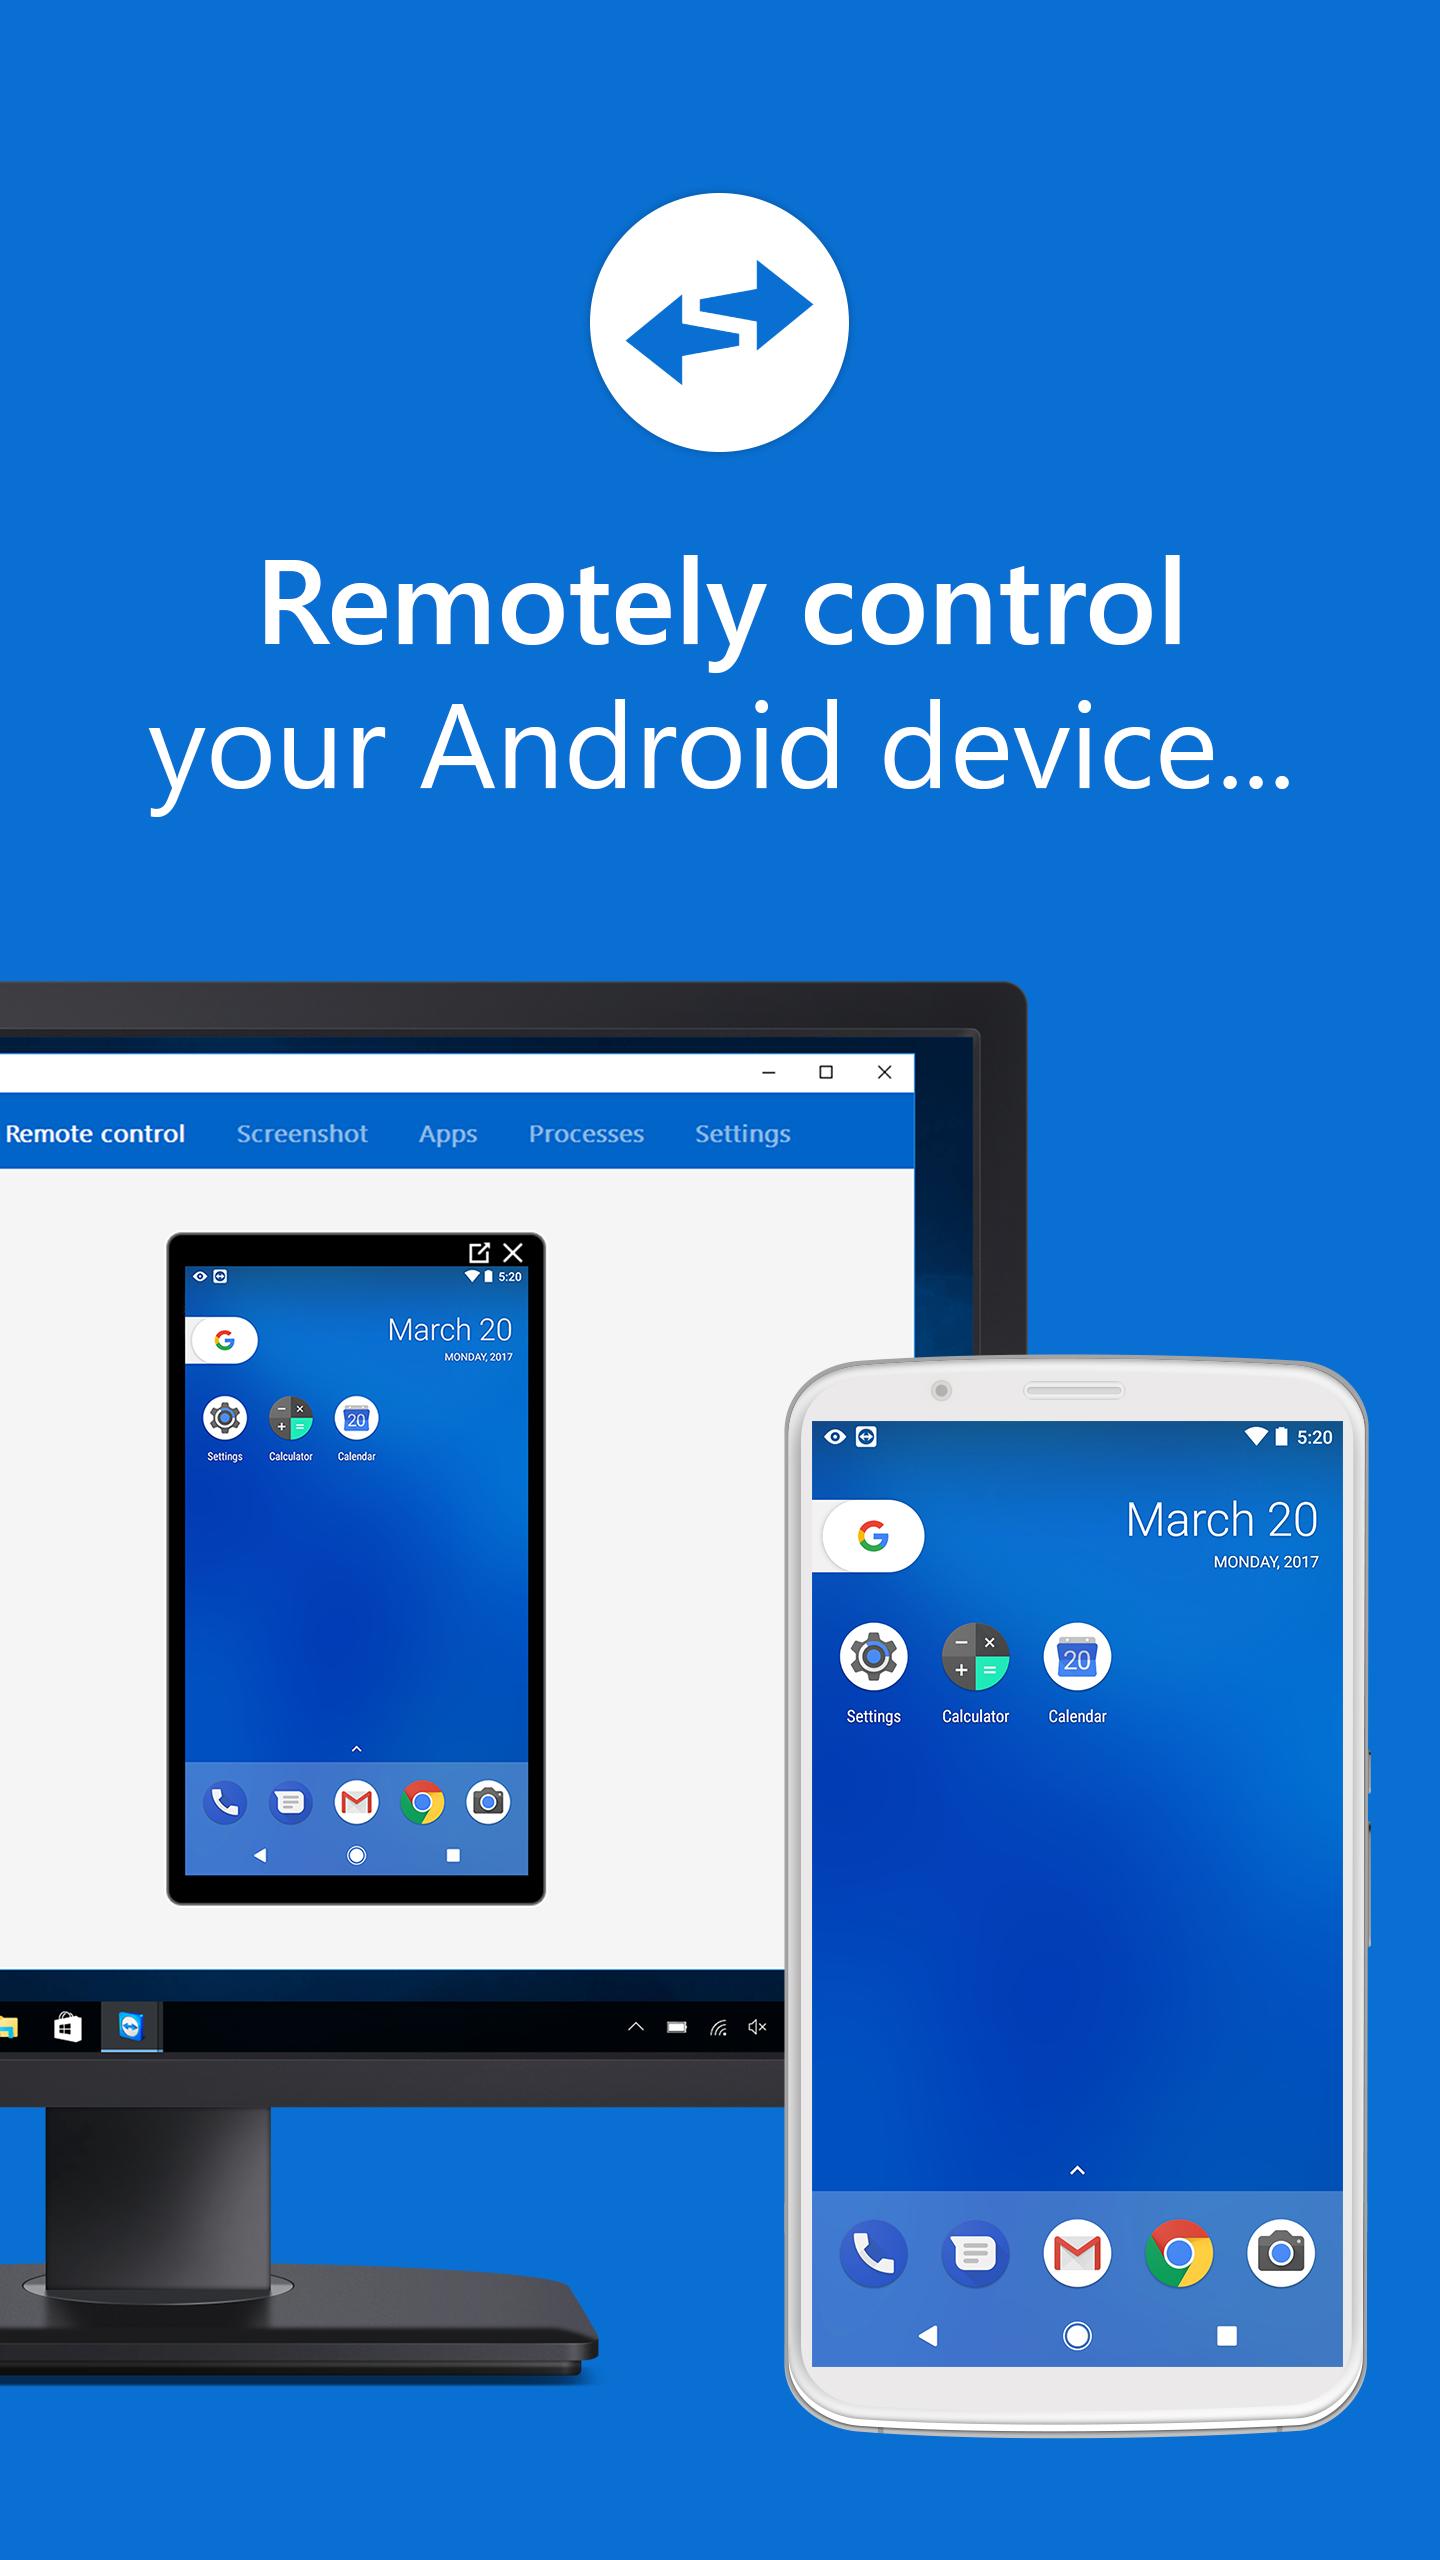 download teamviewer 9 for android